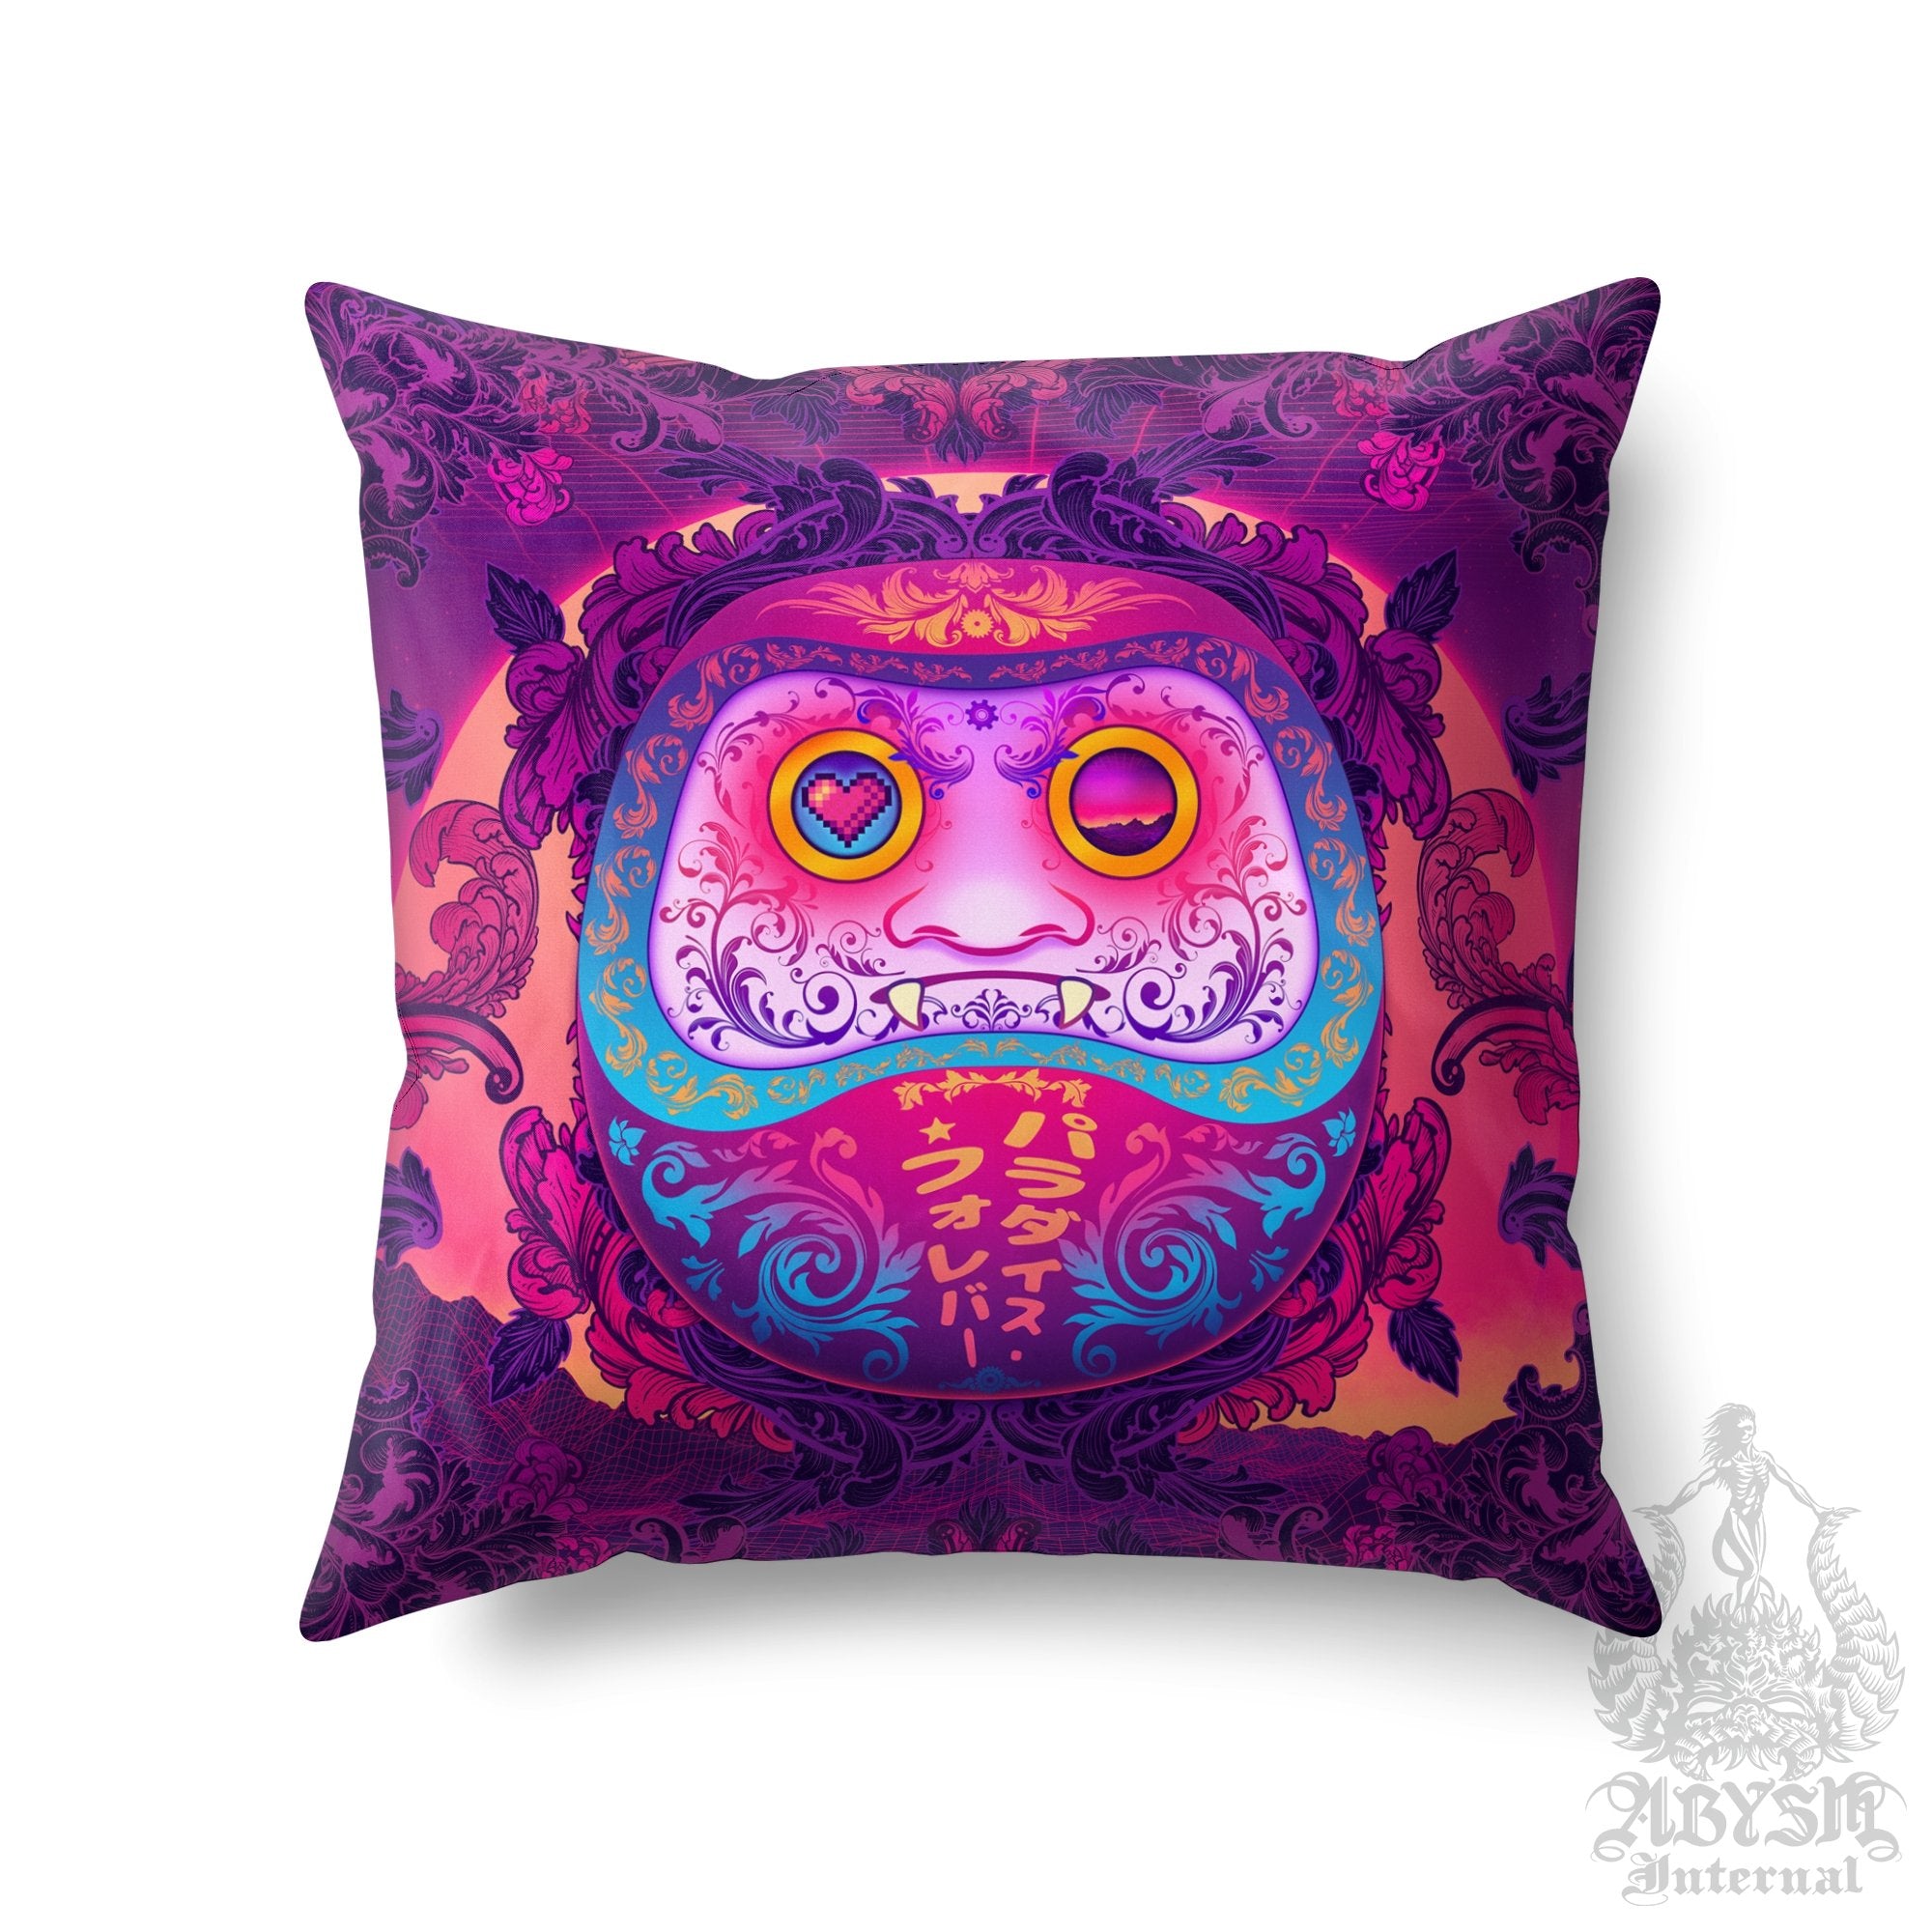 Japanese Vaporwave Throw Pillow, Anime Decorative Accent Cushion, Synthwave and Retrowave 80s Room Decor, Psychedelic Art Print, Gamer Gift - Daruma - Abysm Internal